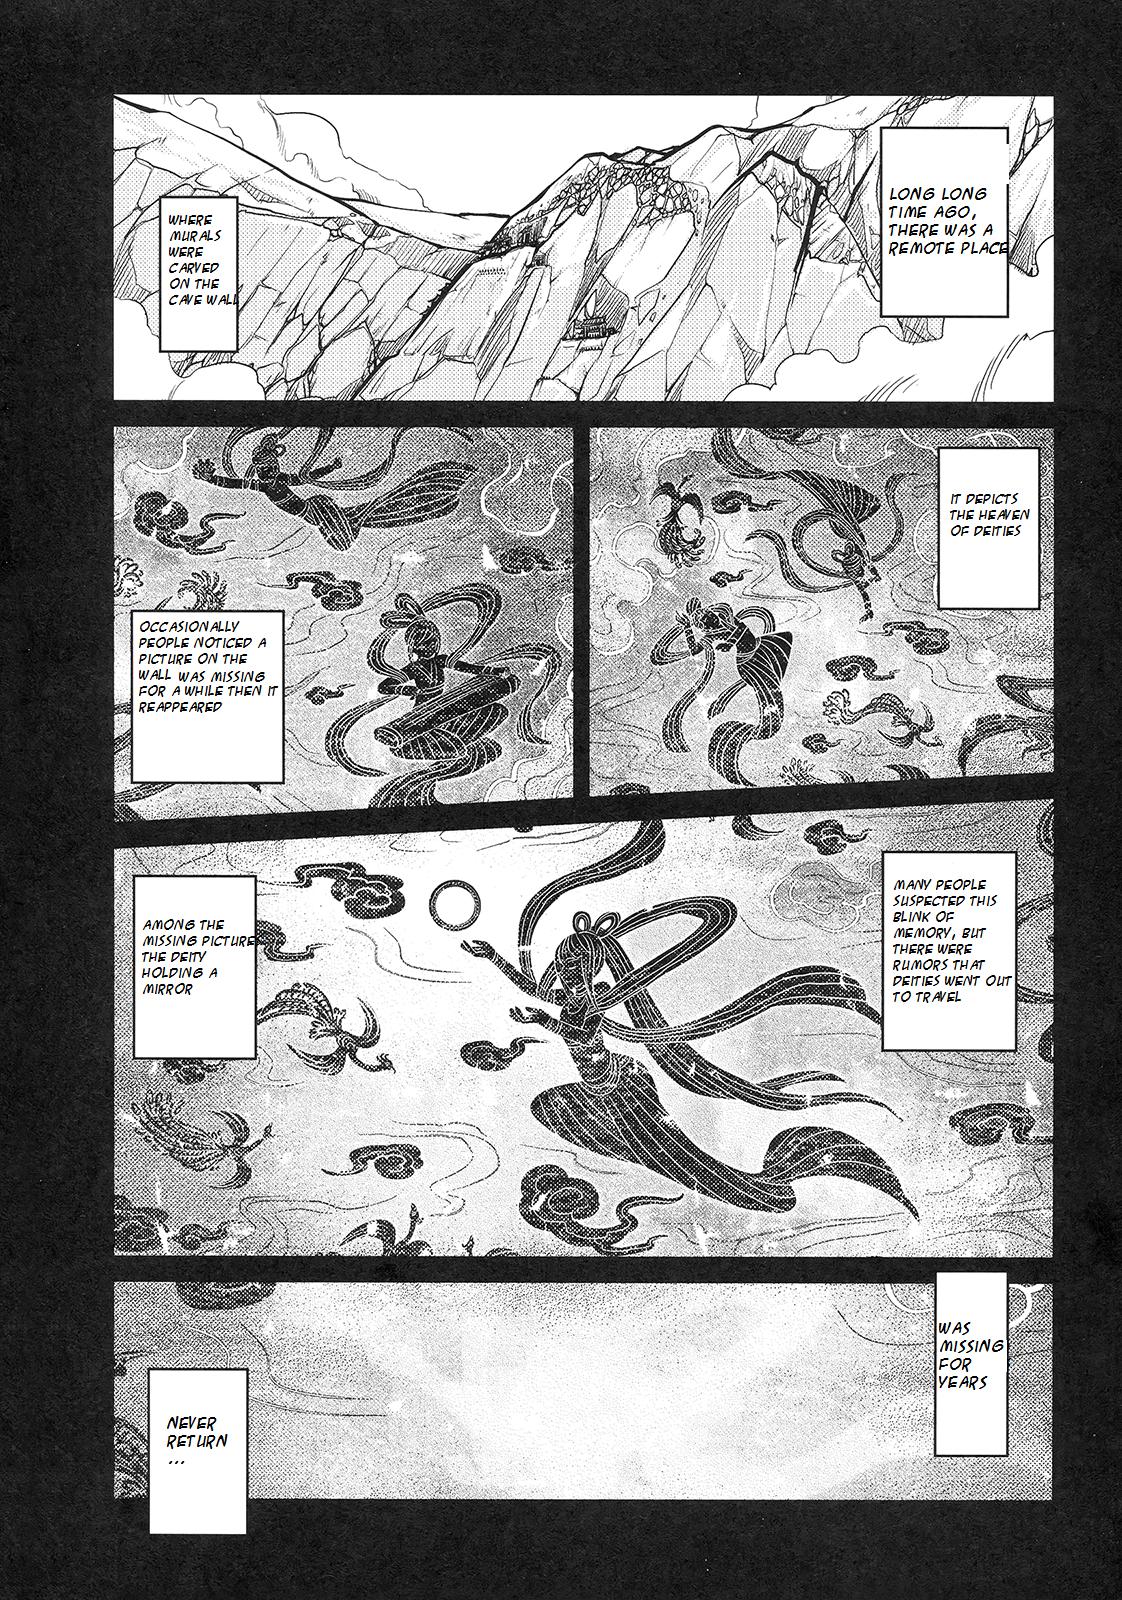 Cruising Tale of the Mirror Tribute - Page 4